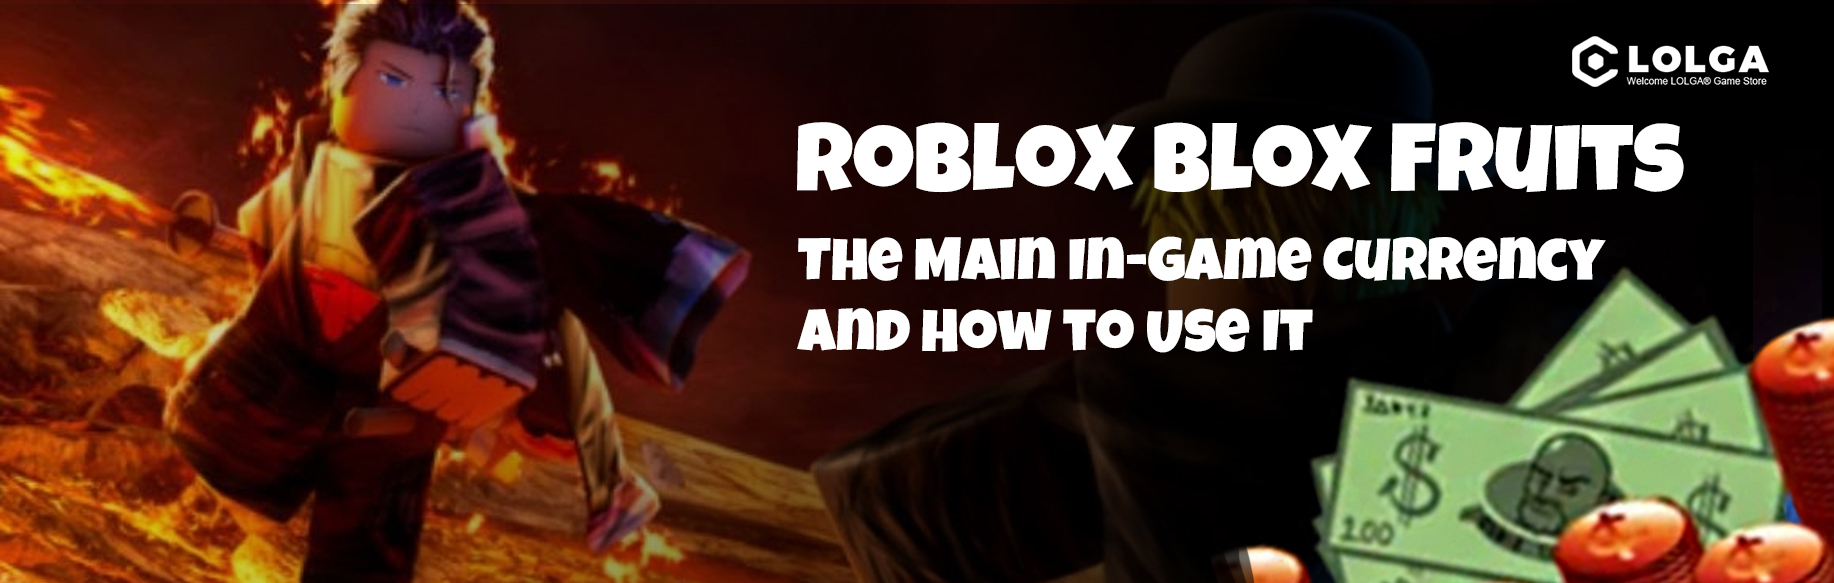 Roblox Blox Fruits: The Main In-Game Currency and How to Use It